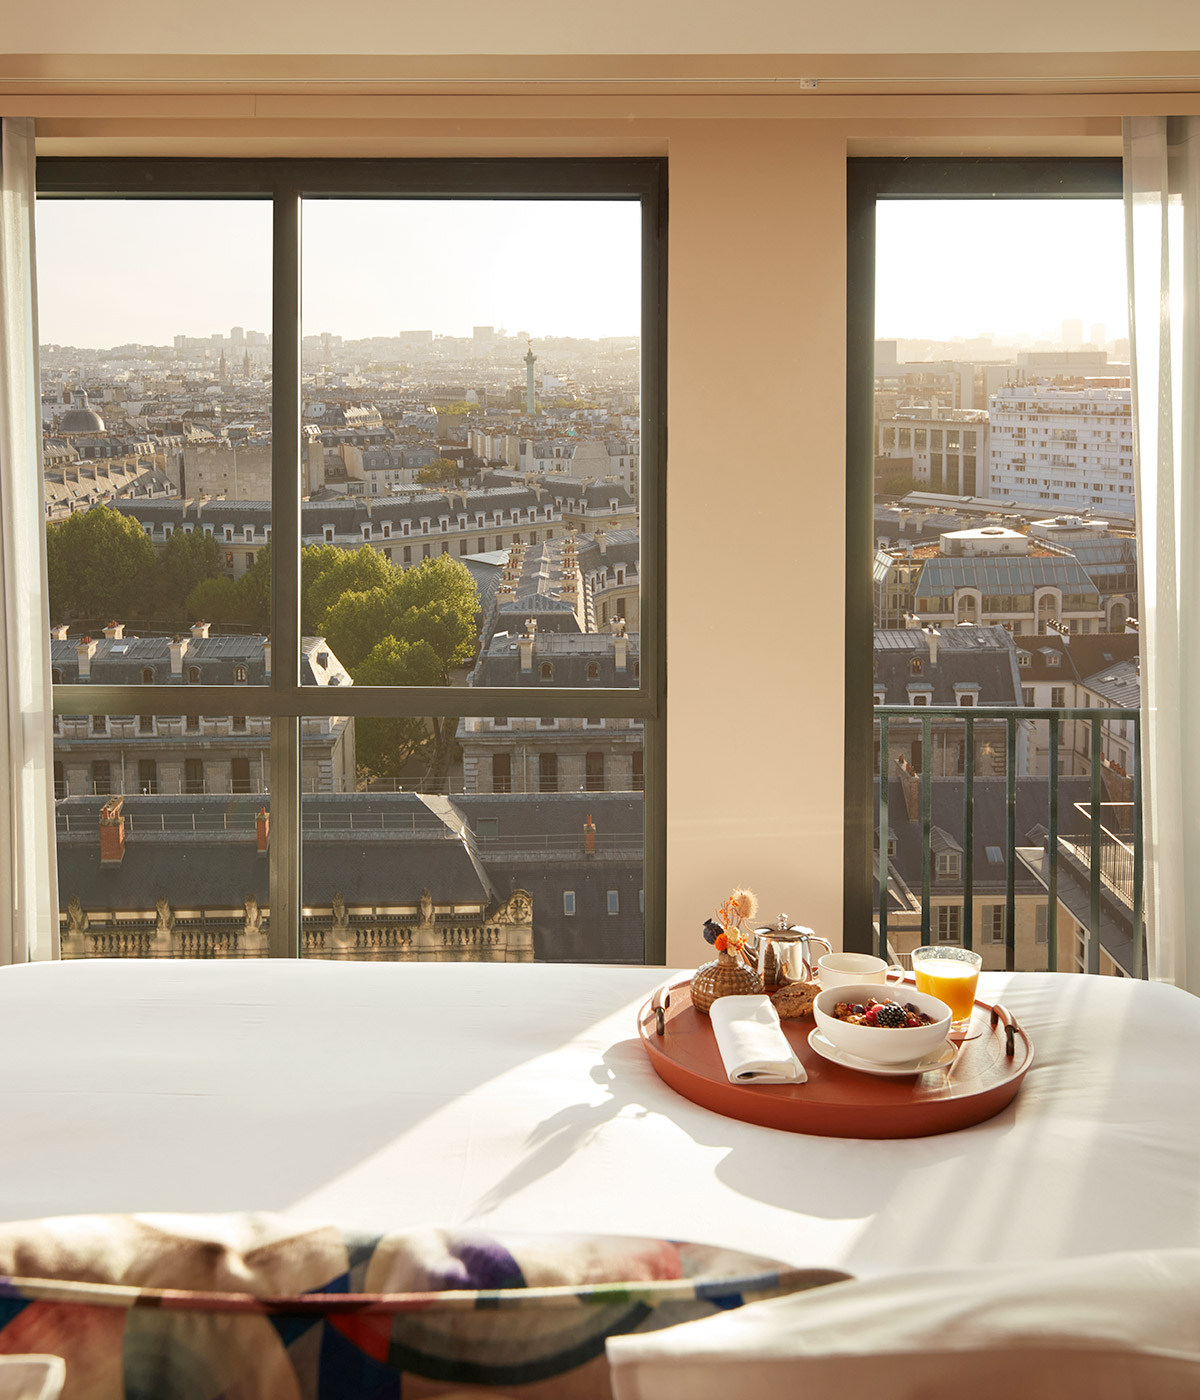 A bed with. a breakfast tray perched on the blanket looks out over a beautiful view of Paris.